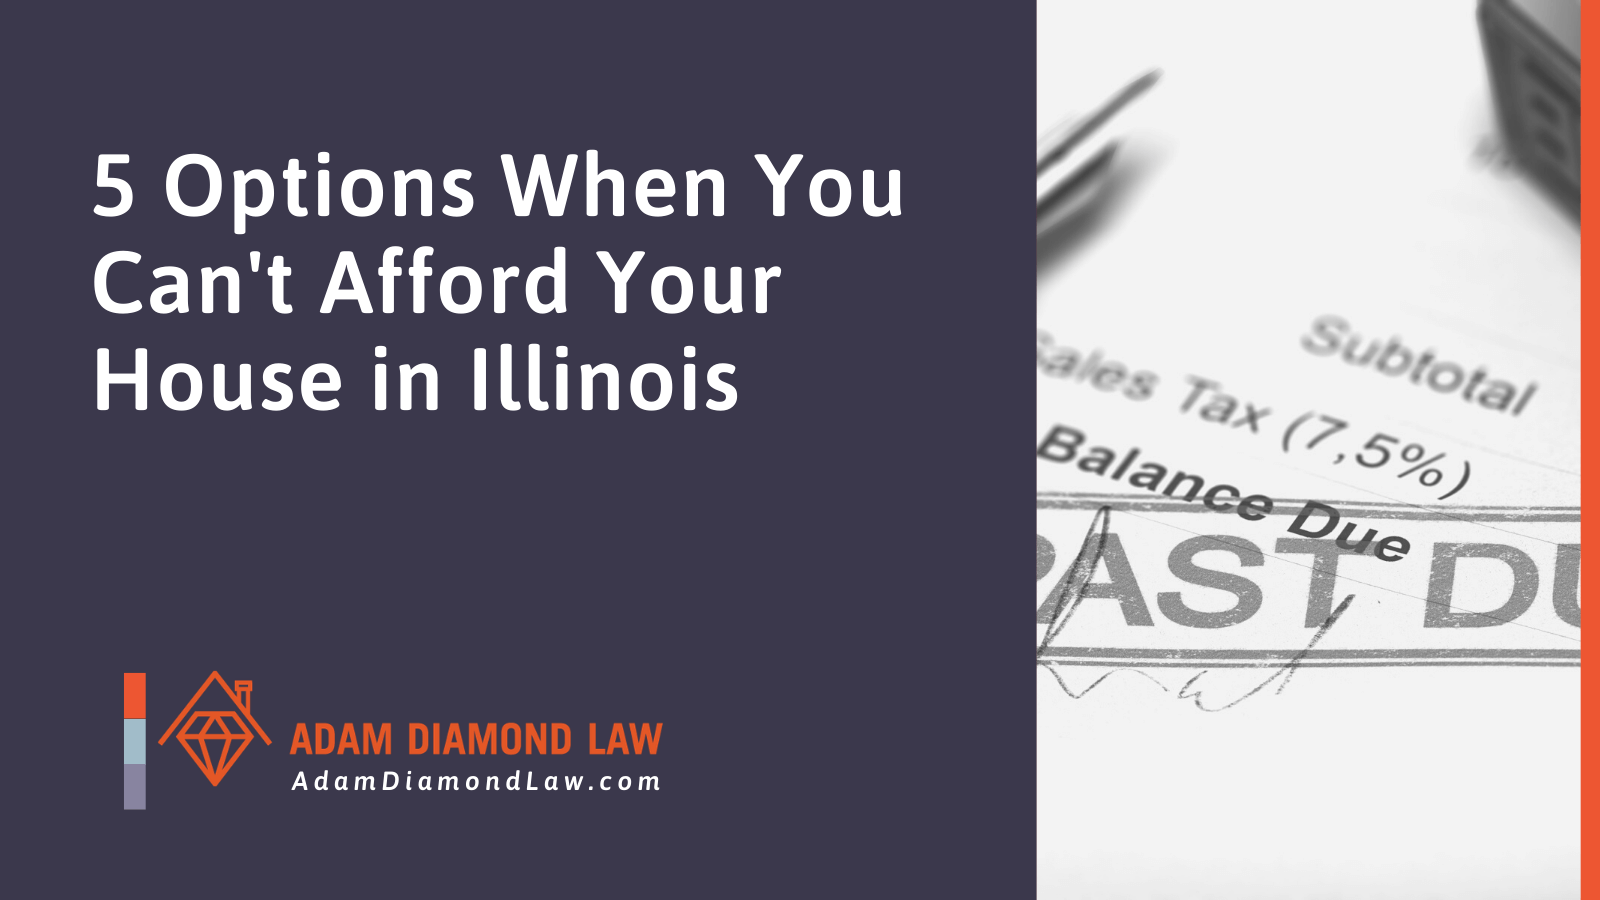 5 Options When You Can't Afford Your House in Illinois - Adam Diamond Law | McHenry, IL Residential Real Estate Lawyer